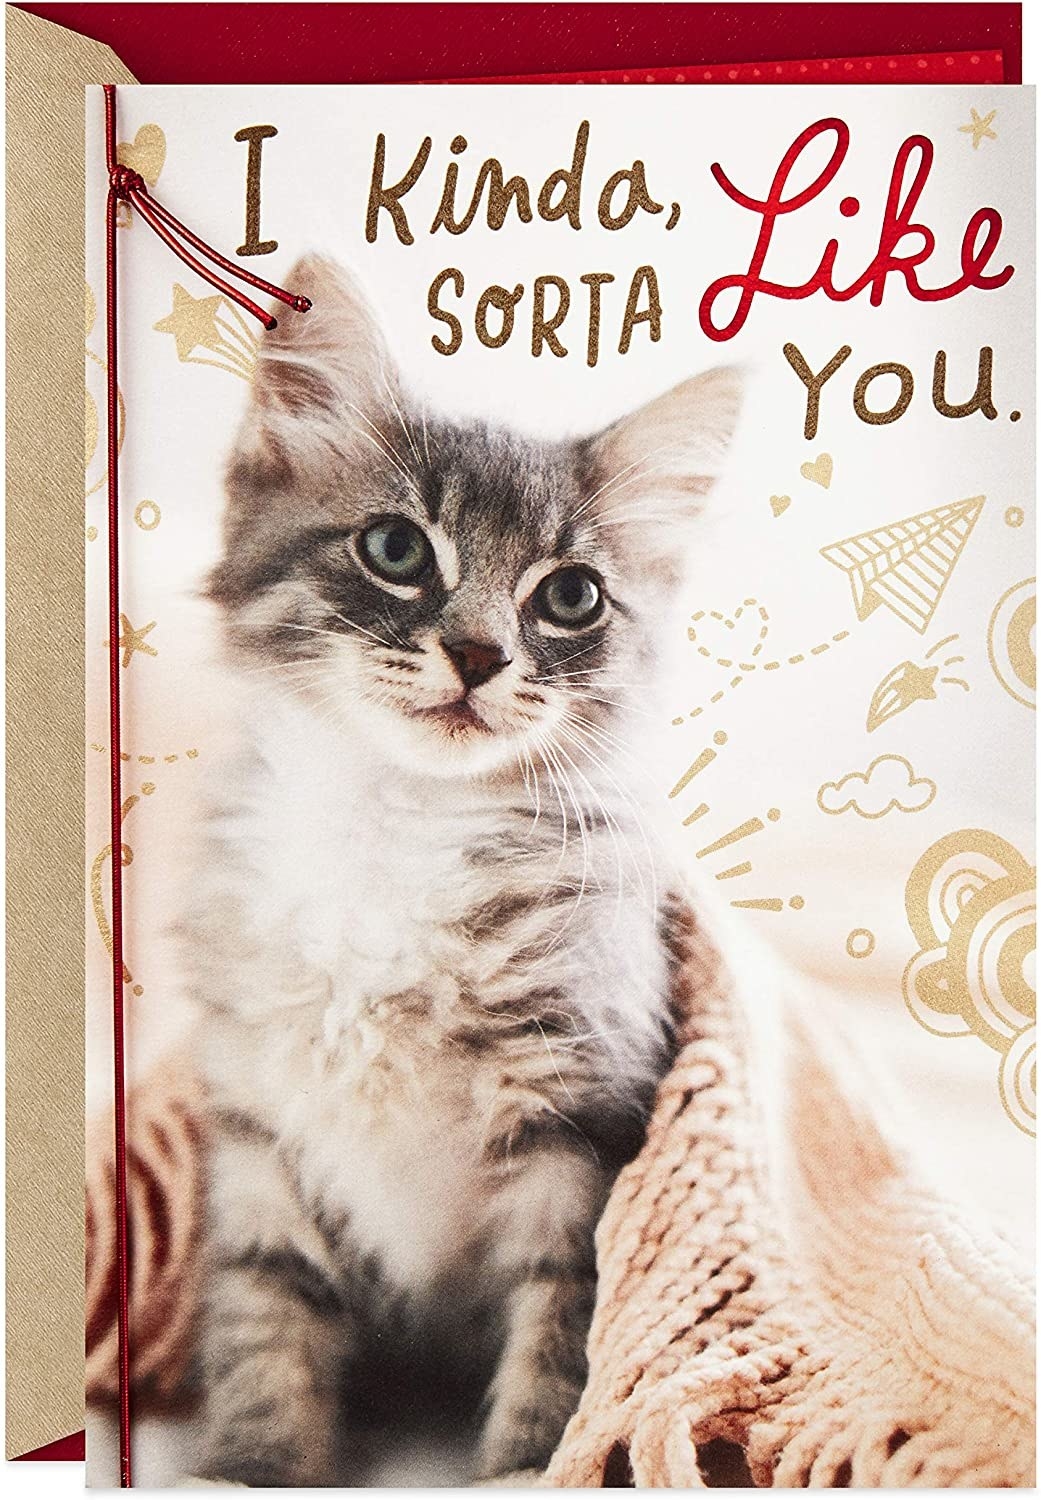 A photo of a cat with the words &quot;I kinda, sorta like you&quot; in red and gold